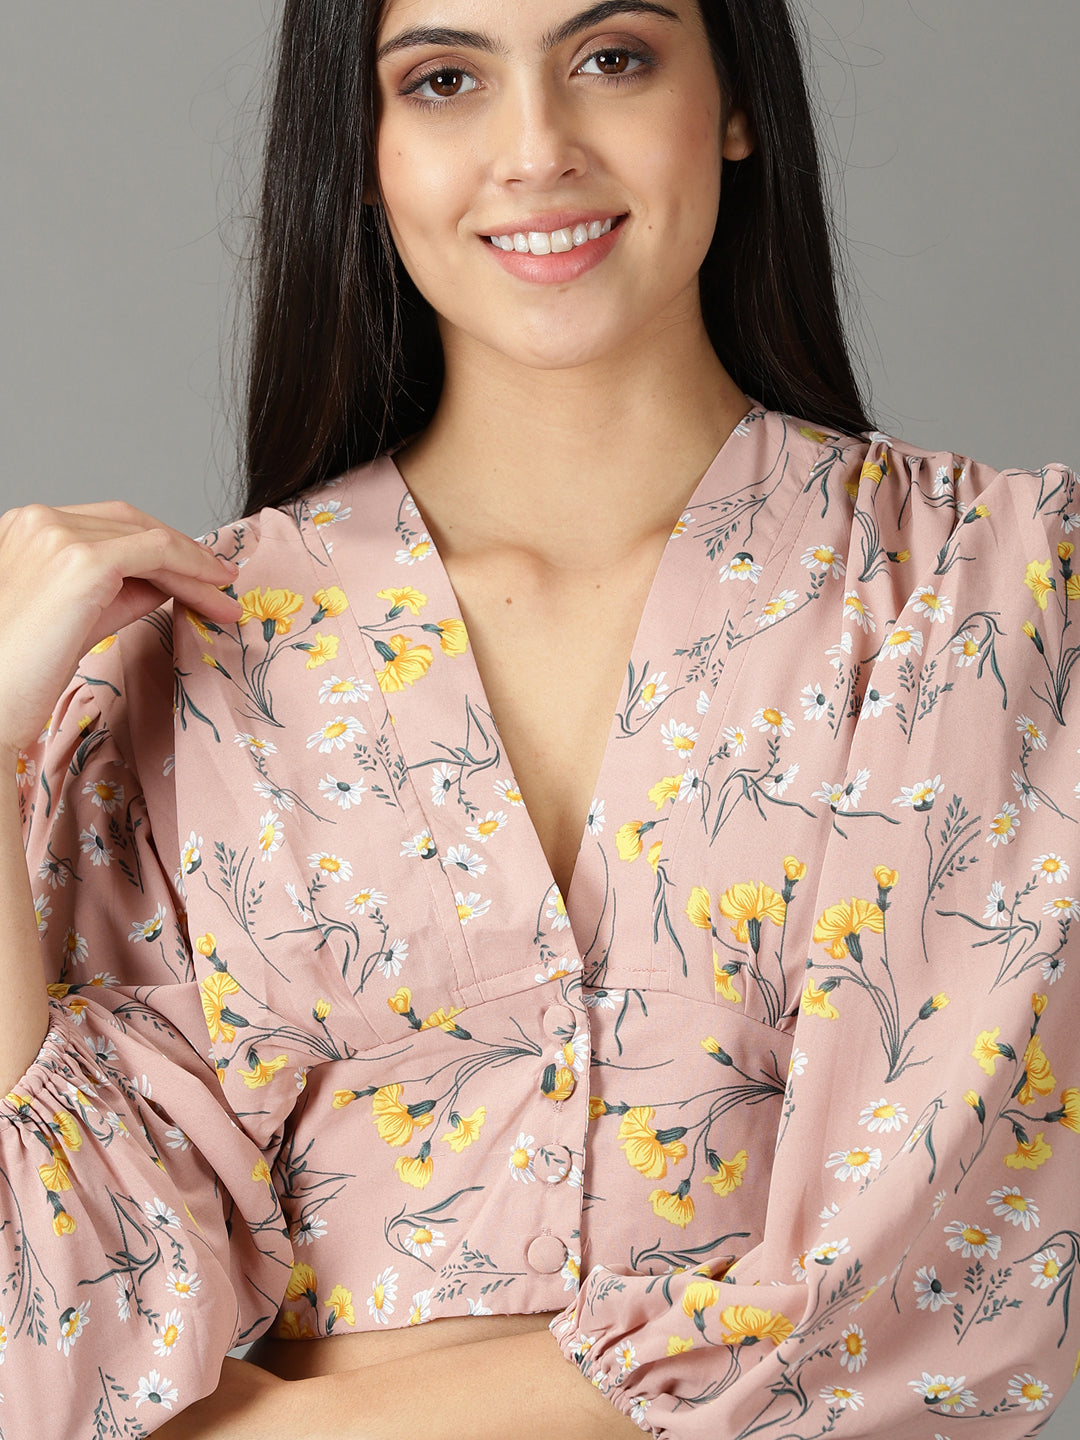 Women's Mauve Printed Cinched Waist Top